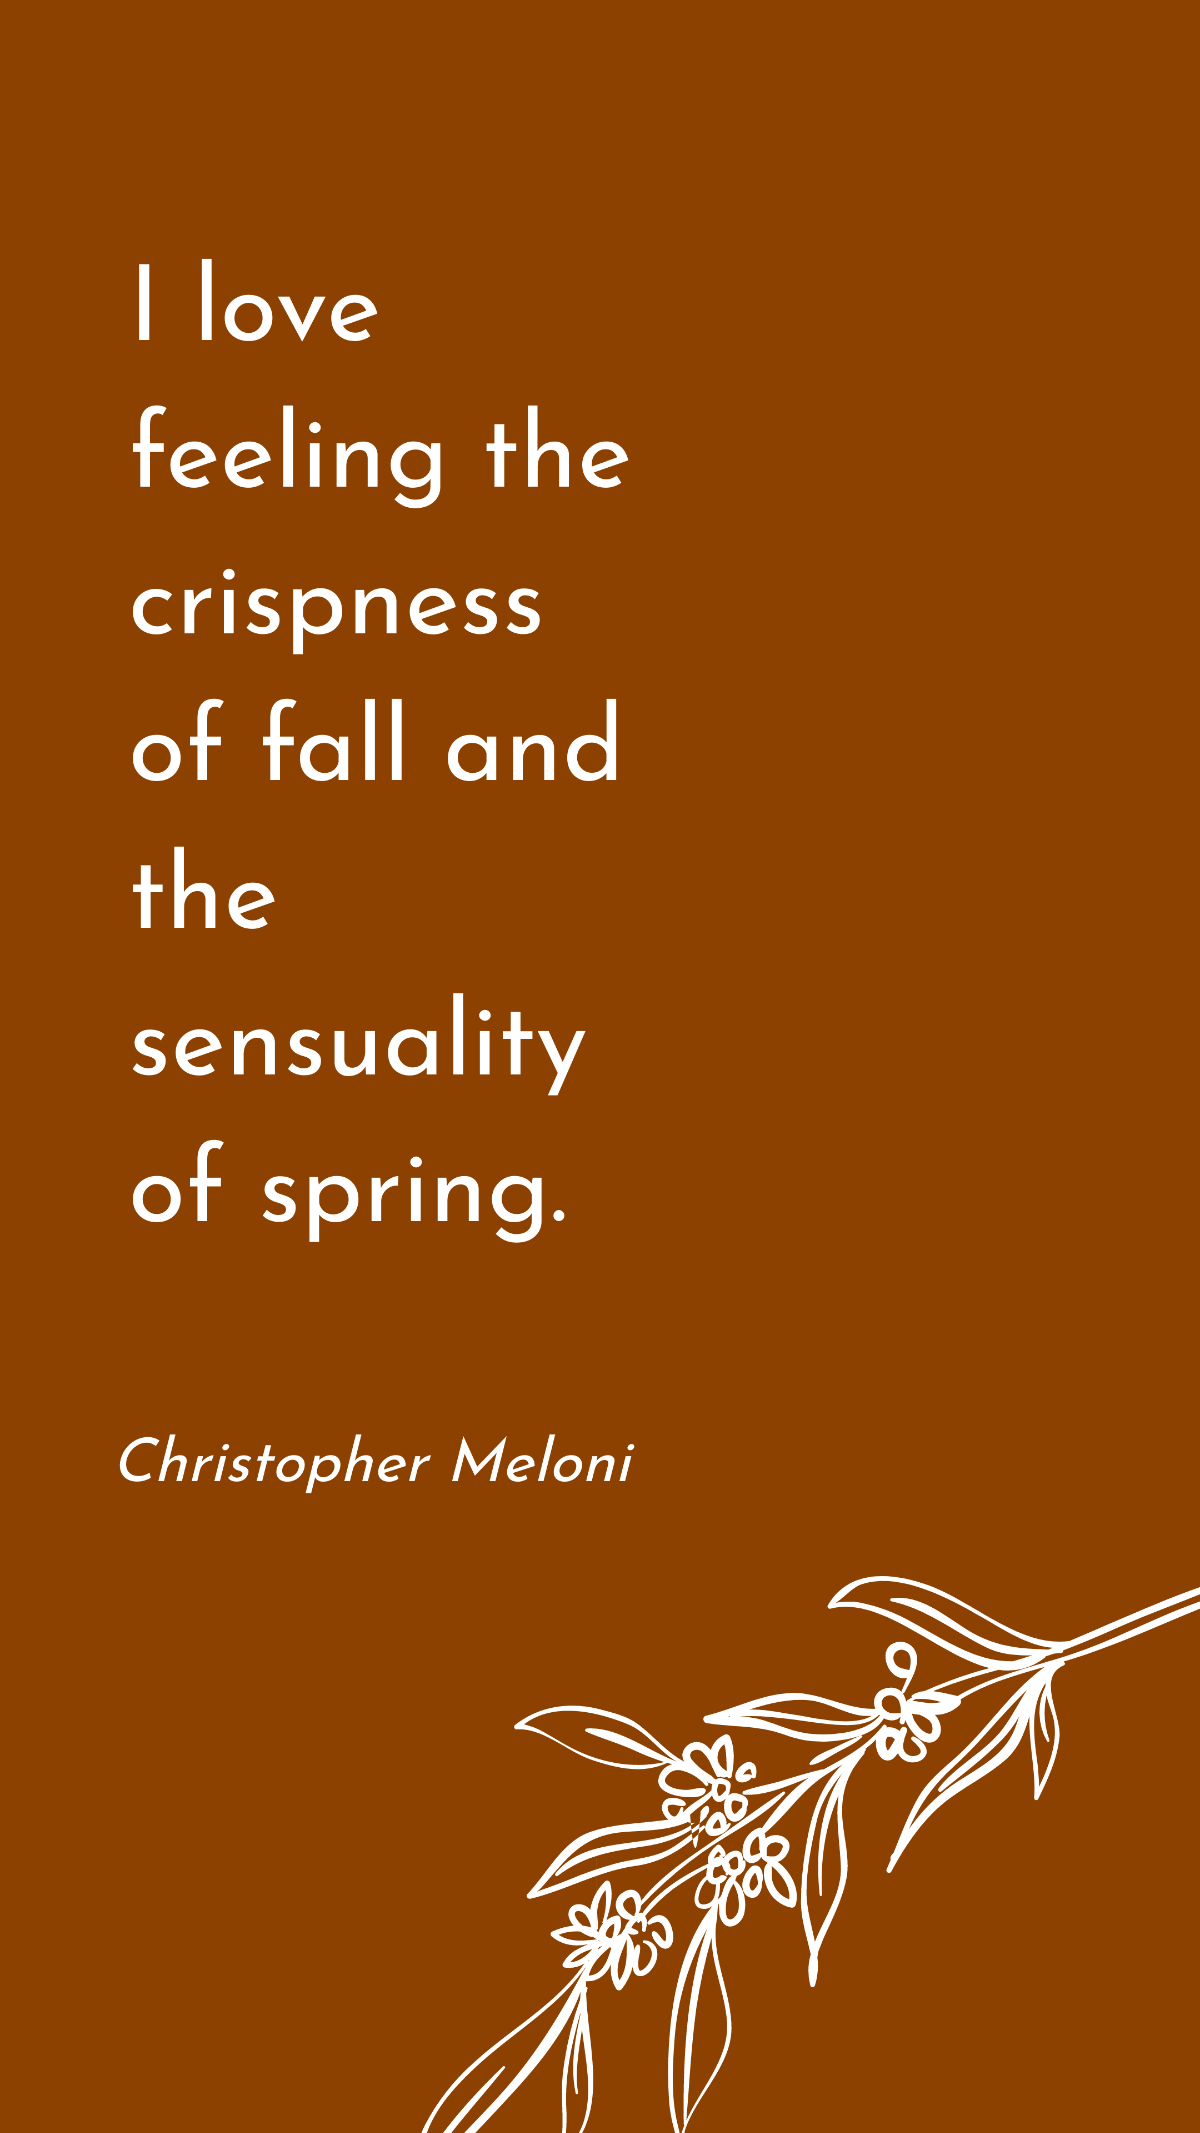 Free Christopher Meloni - I love feeling the crispness of fall and the sensuality of spring. Template